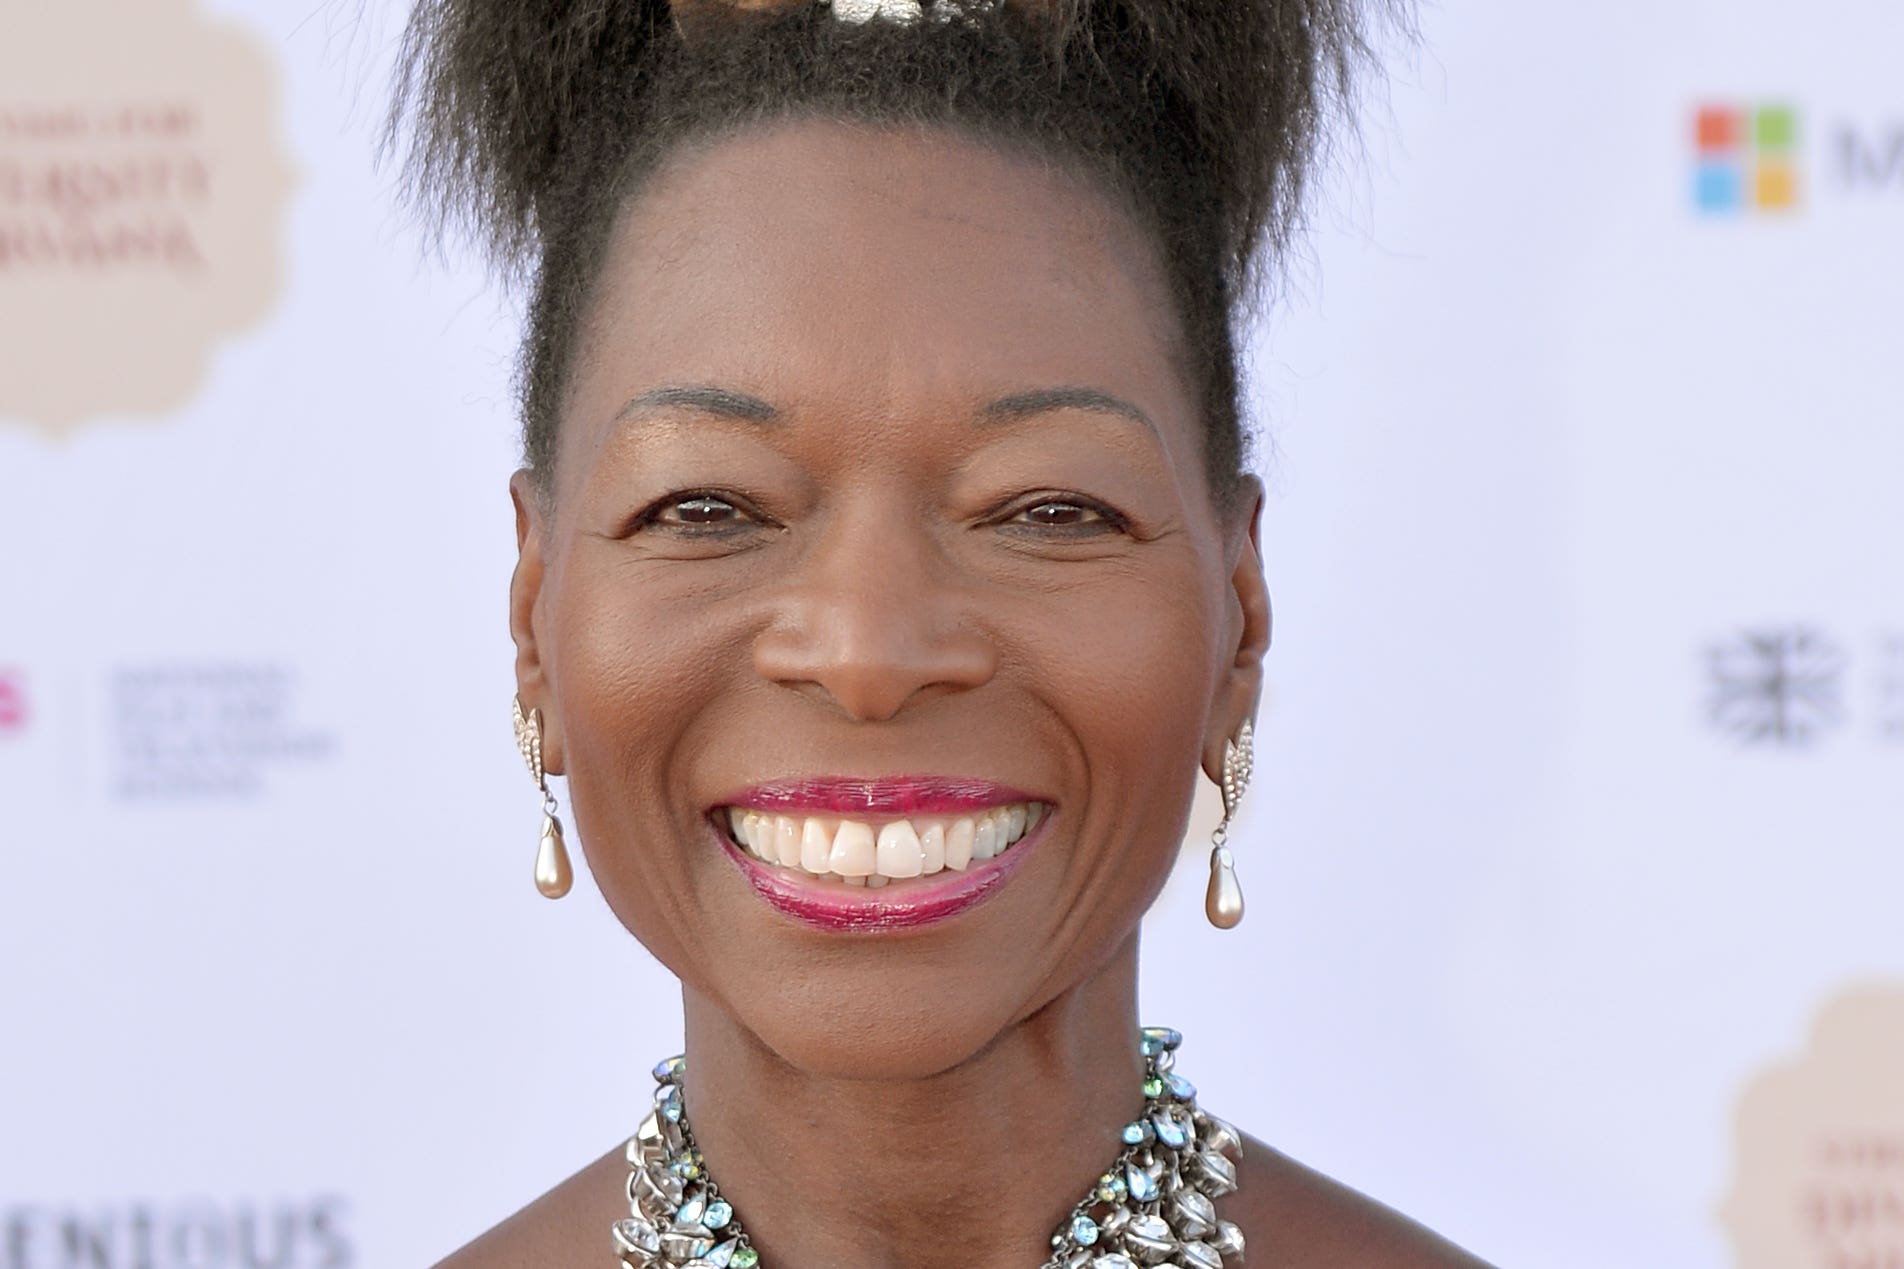 Baroness Floella Benjamin attending the National Film and Television School’s Gala annual fundraiser at Old Billingsgate, London (Anthony Devlin/PA)